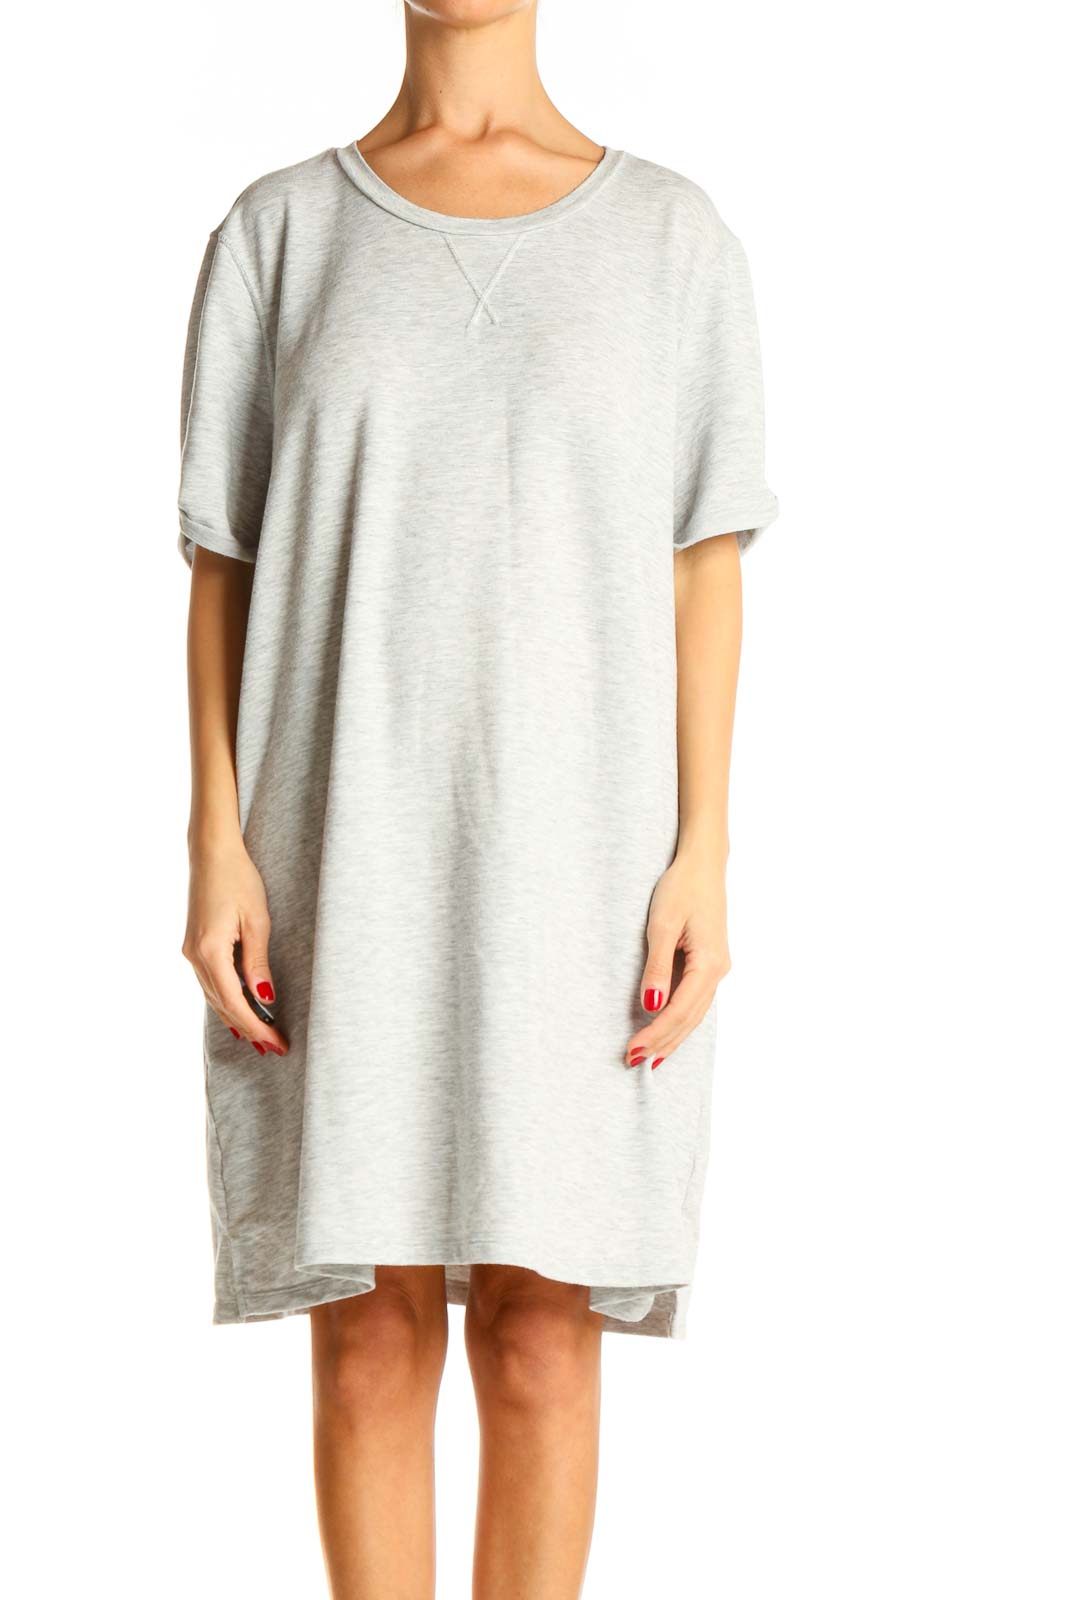 Gray Casual Sweater Dress Front